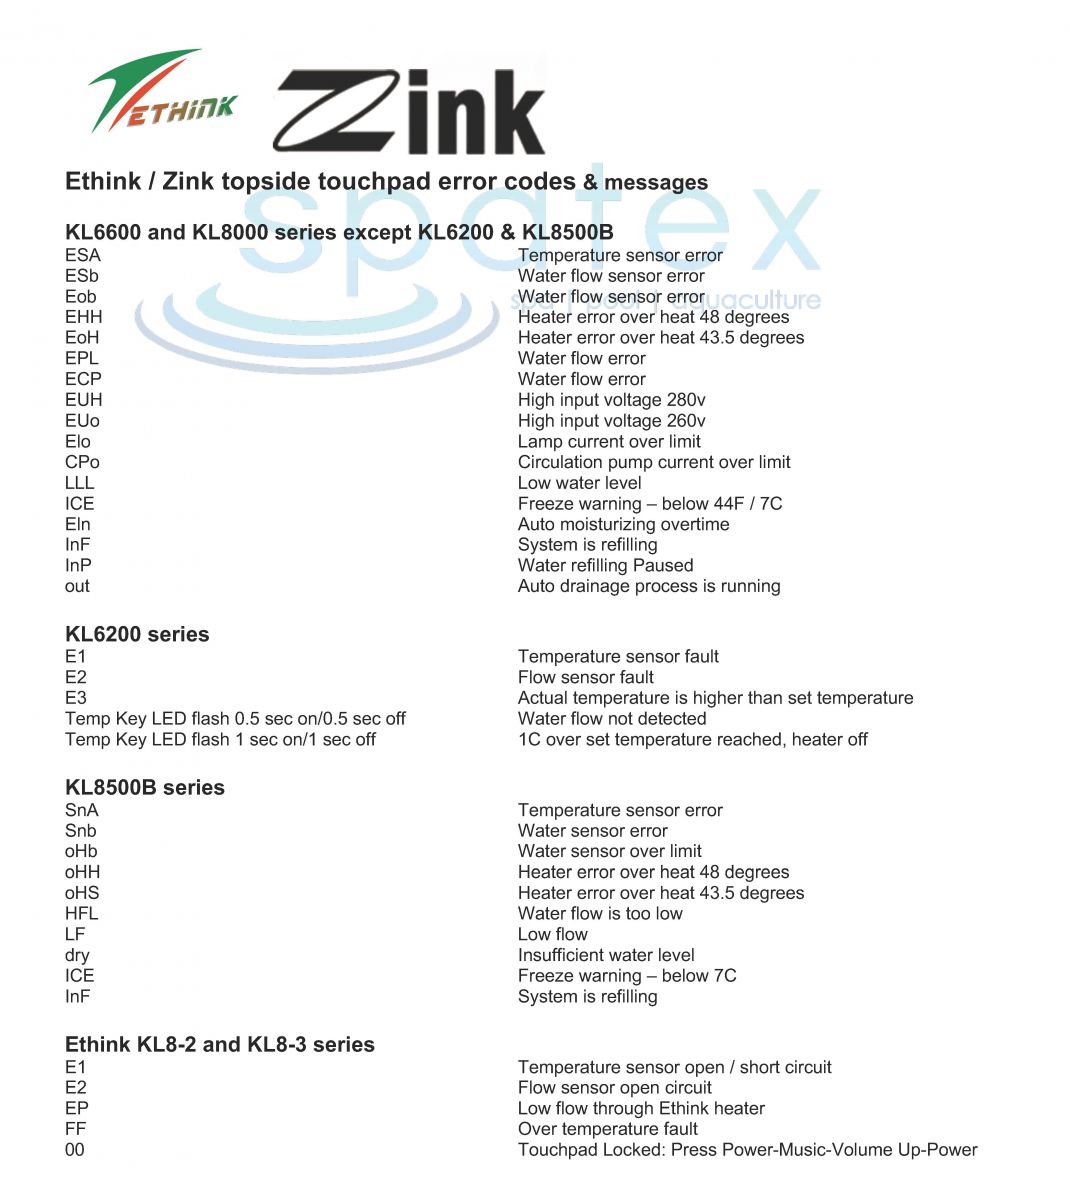 EThink Zink spa topside touchpad error fault codes and messages